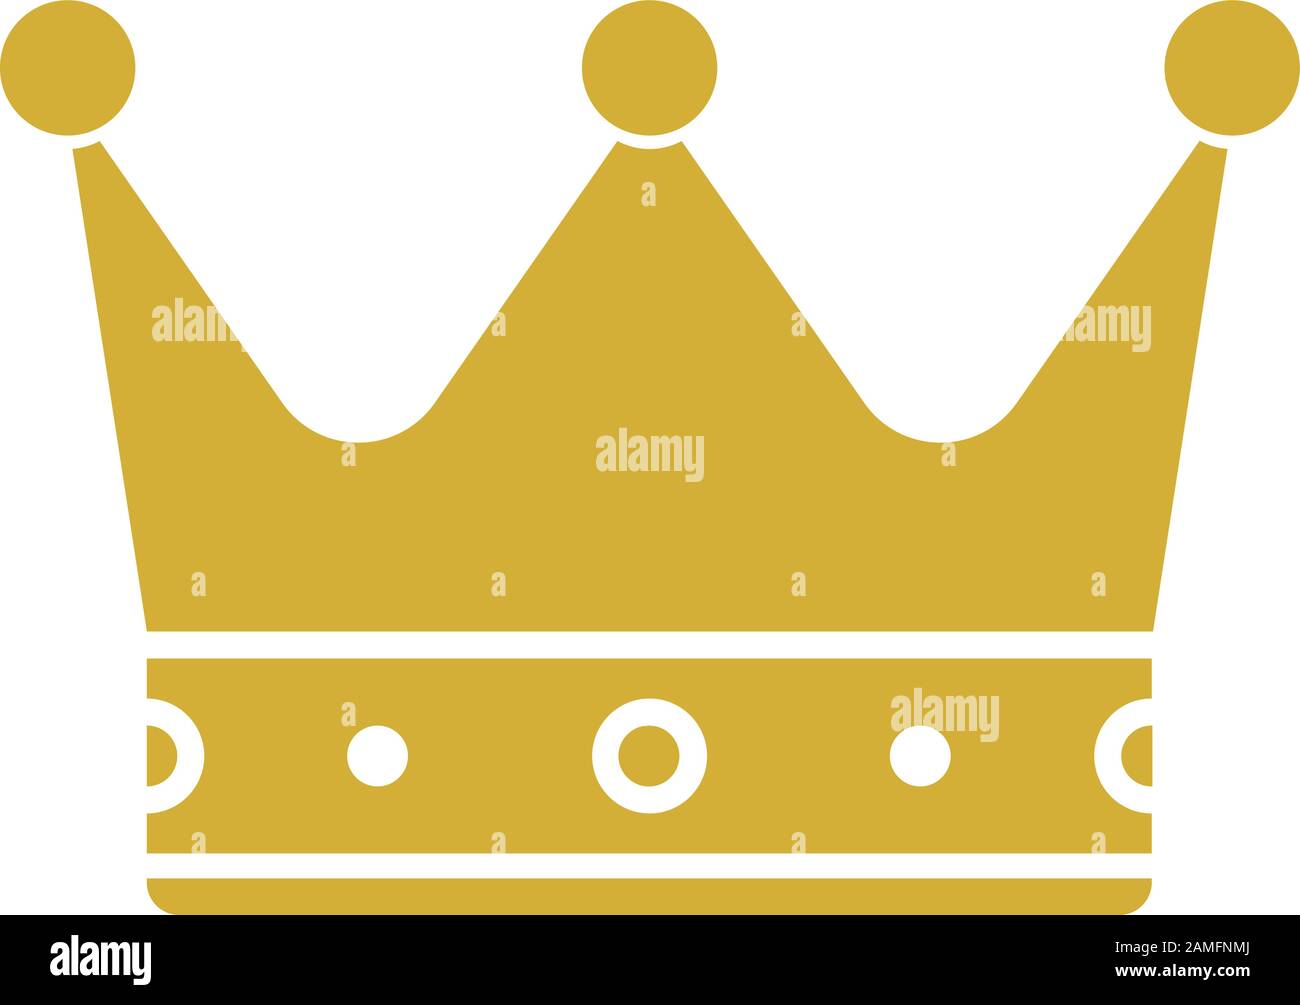 golden crown icon or symbol vector illustration Stock Vector